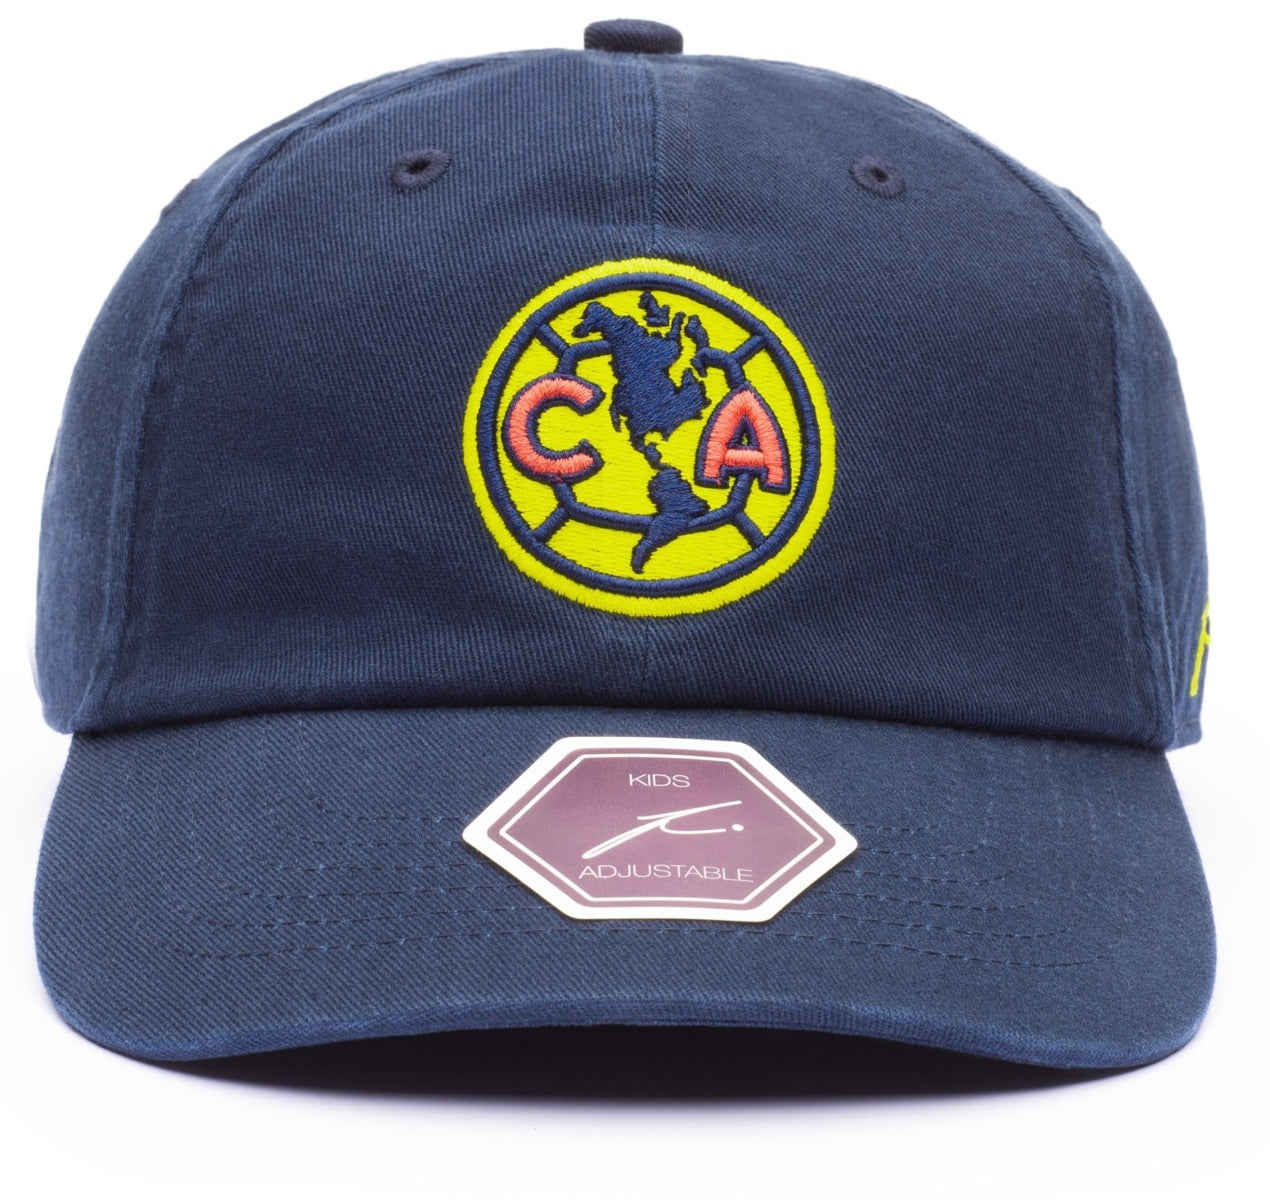 FI COLLECTION CLUB AMERICA YOUTH NAVY ADJUSTABLE CAP